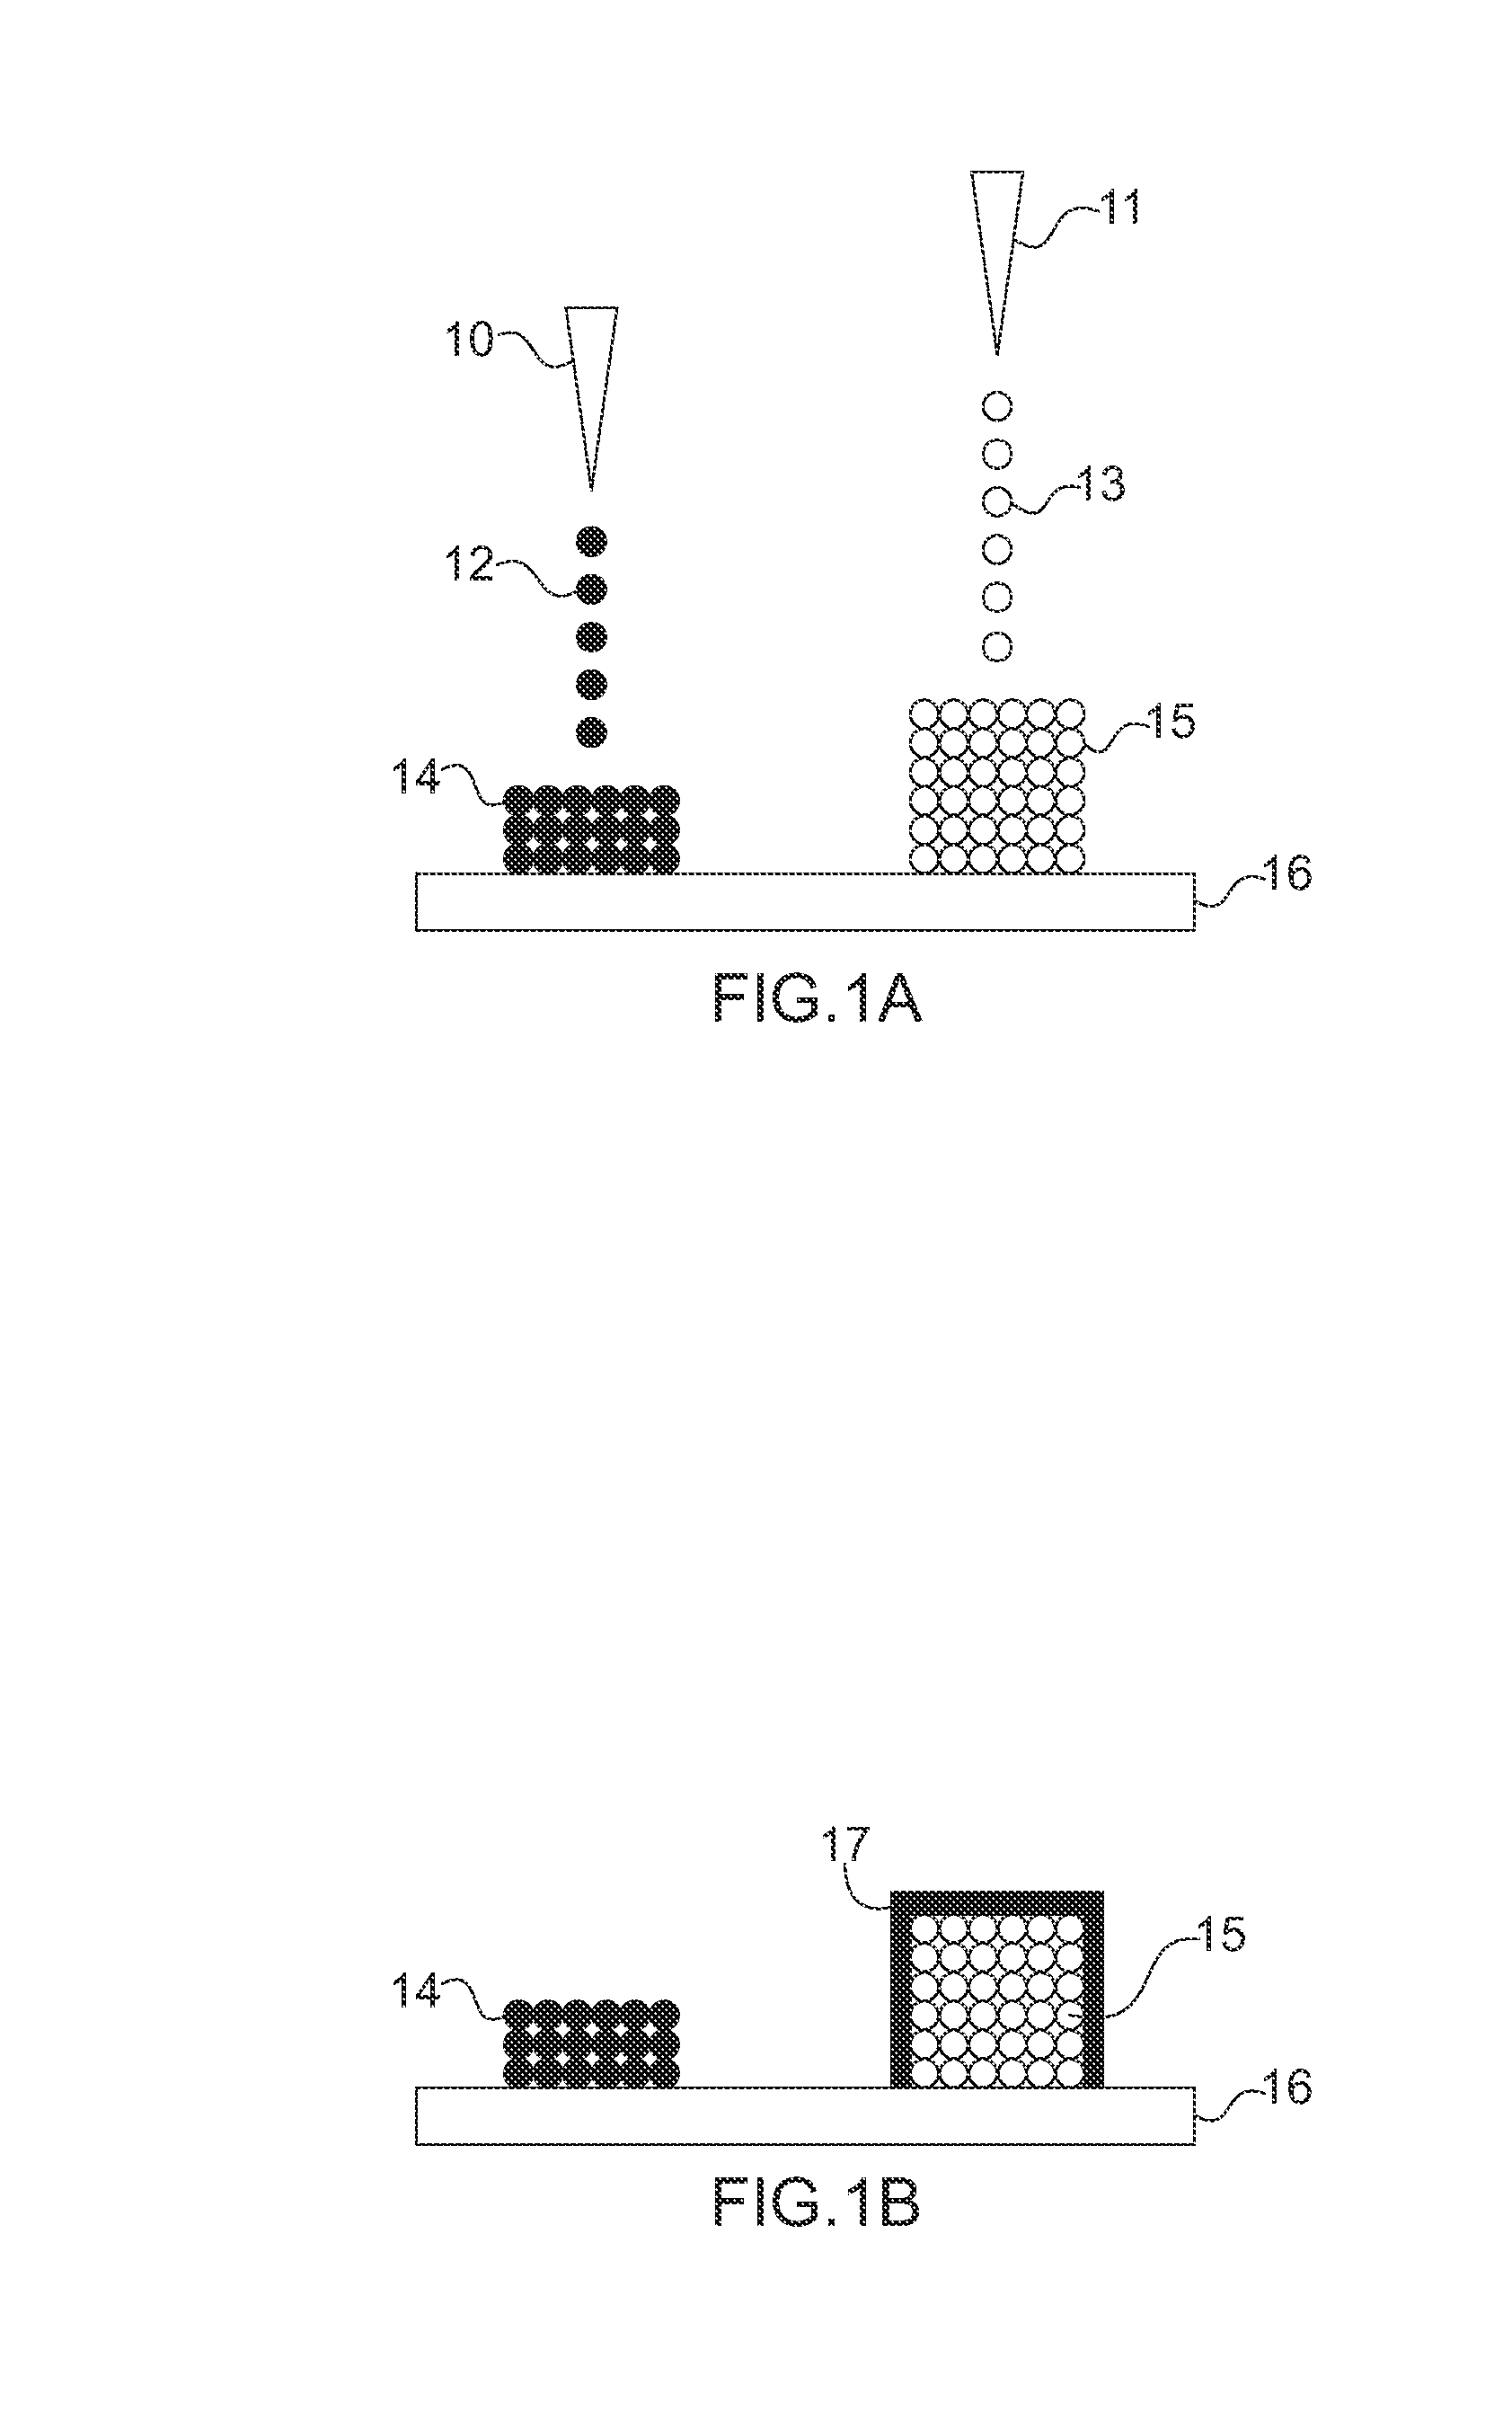 Methods of fabricating electronic and mechanical structures